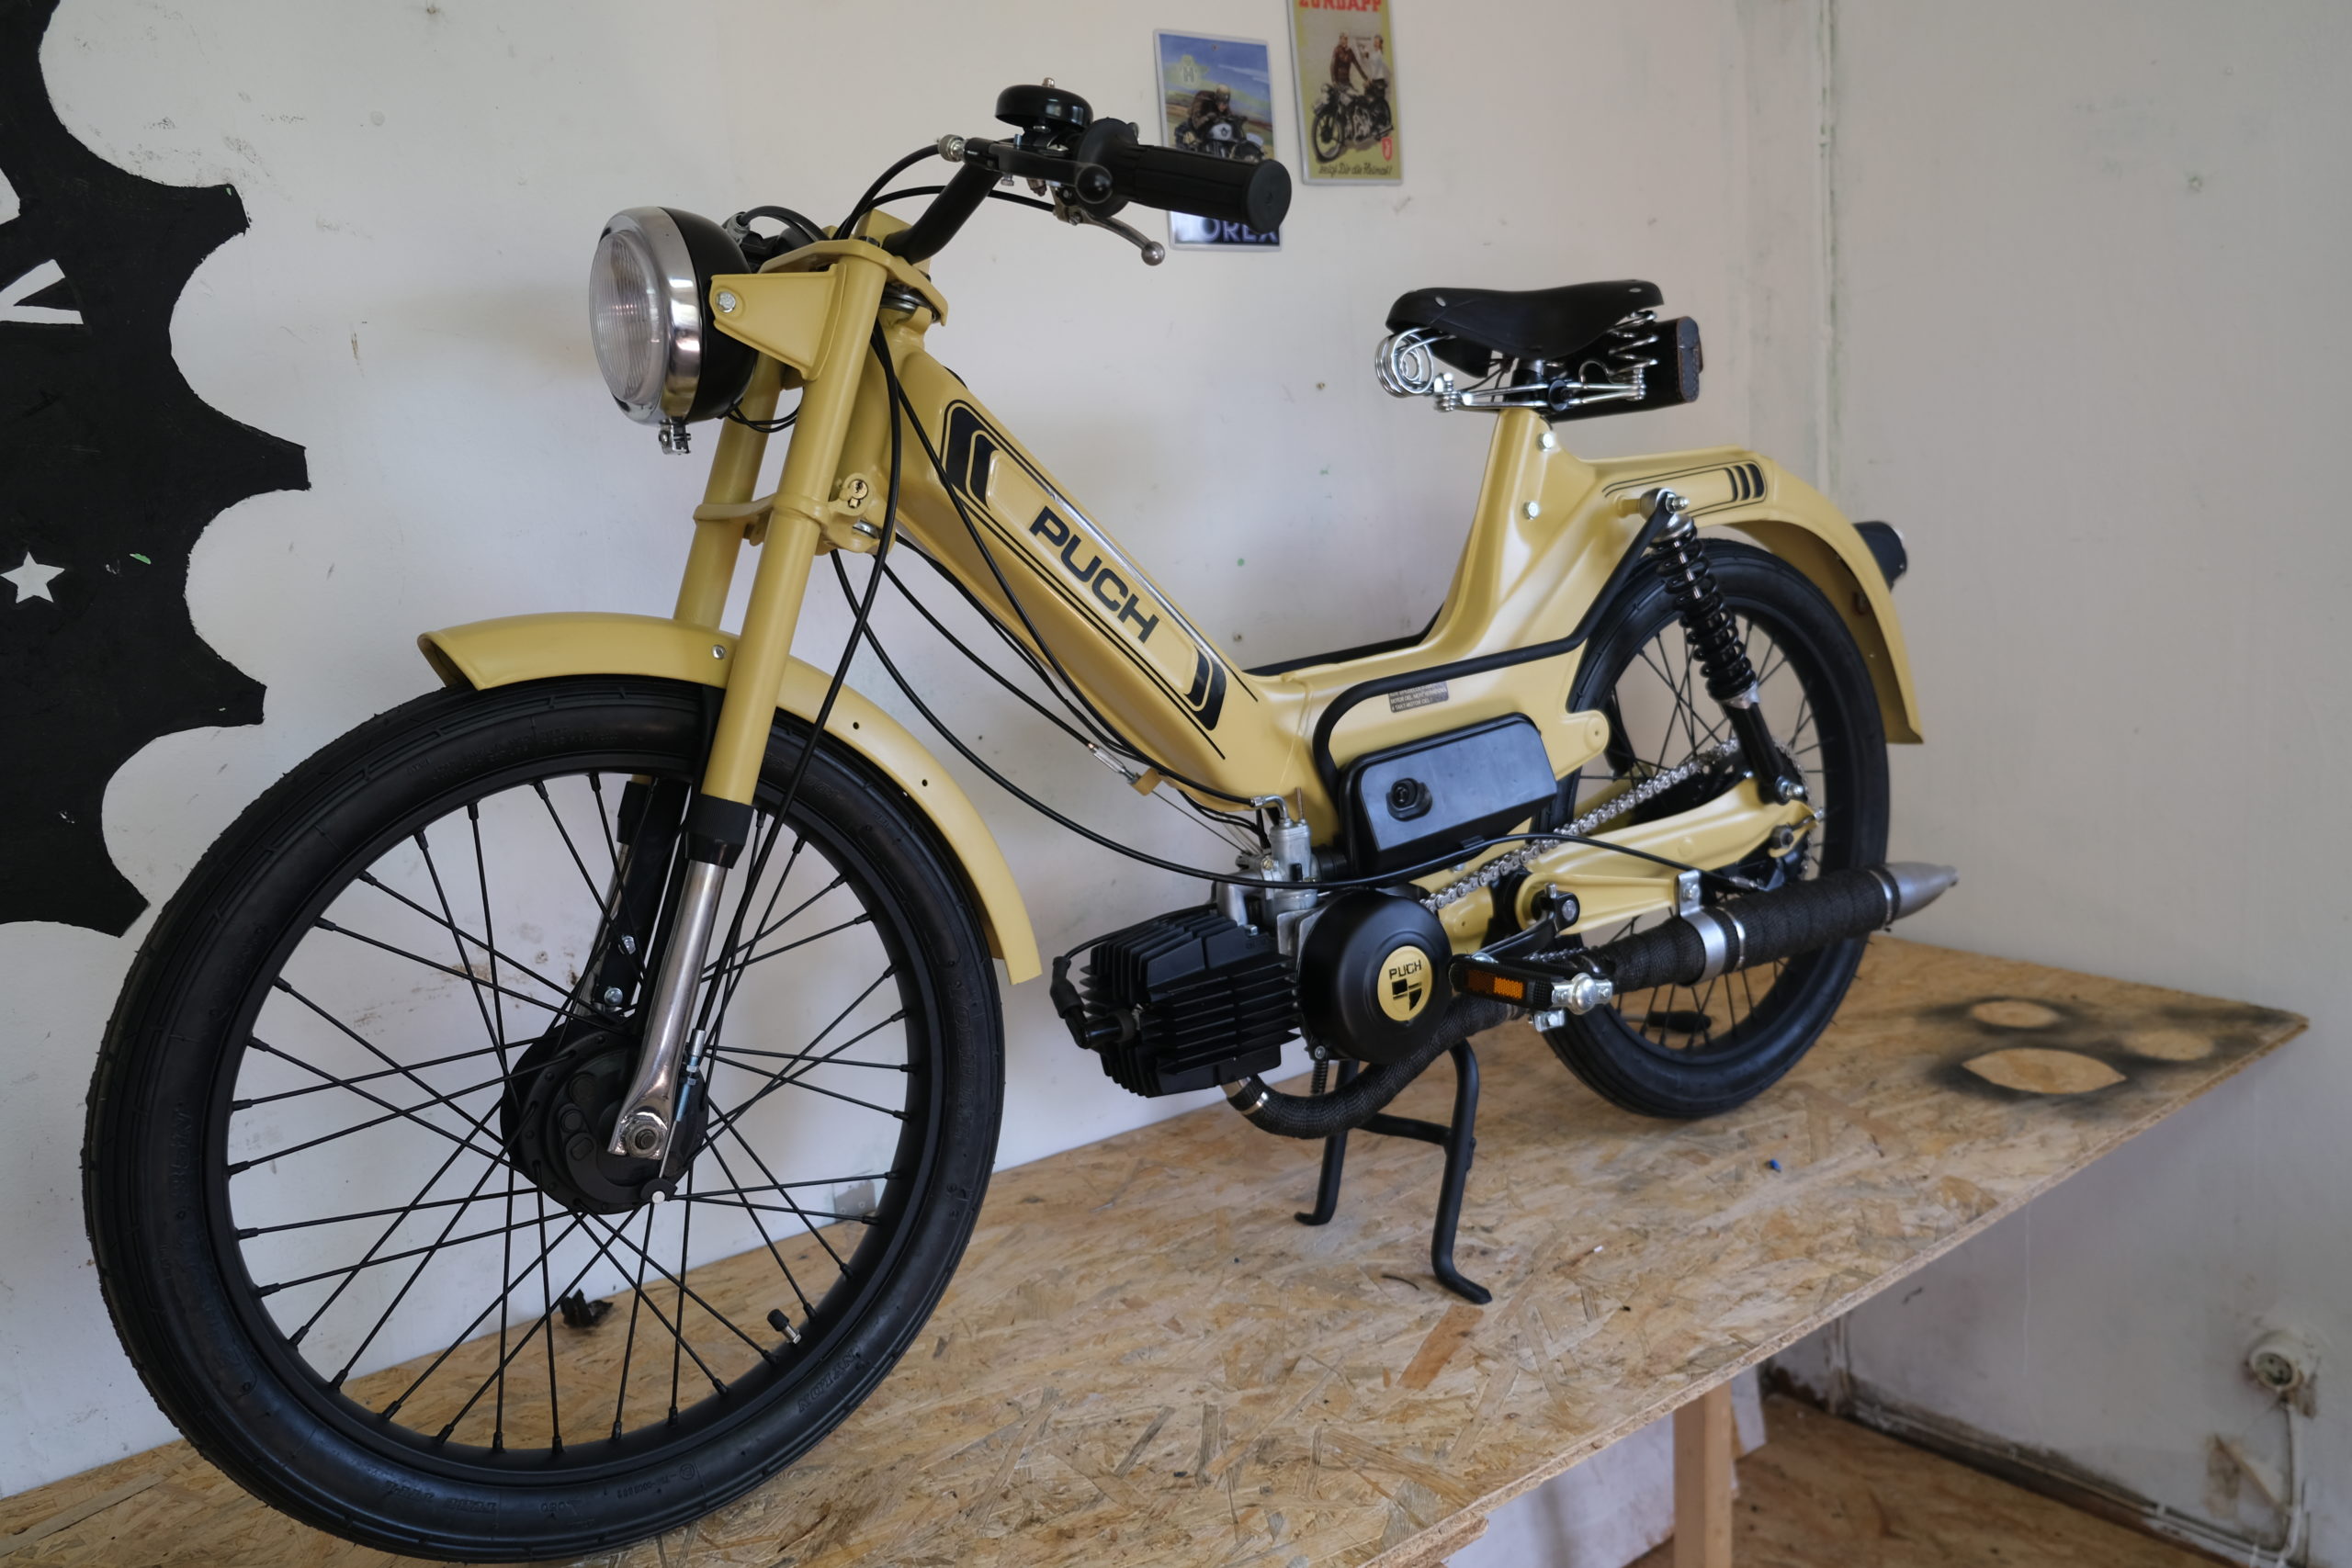 MOPED FACTORY – MOPEDS AND MORE